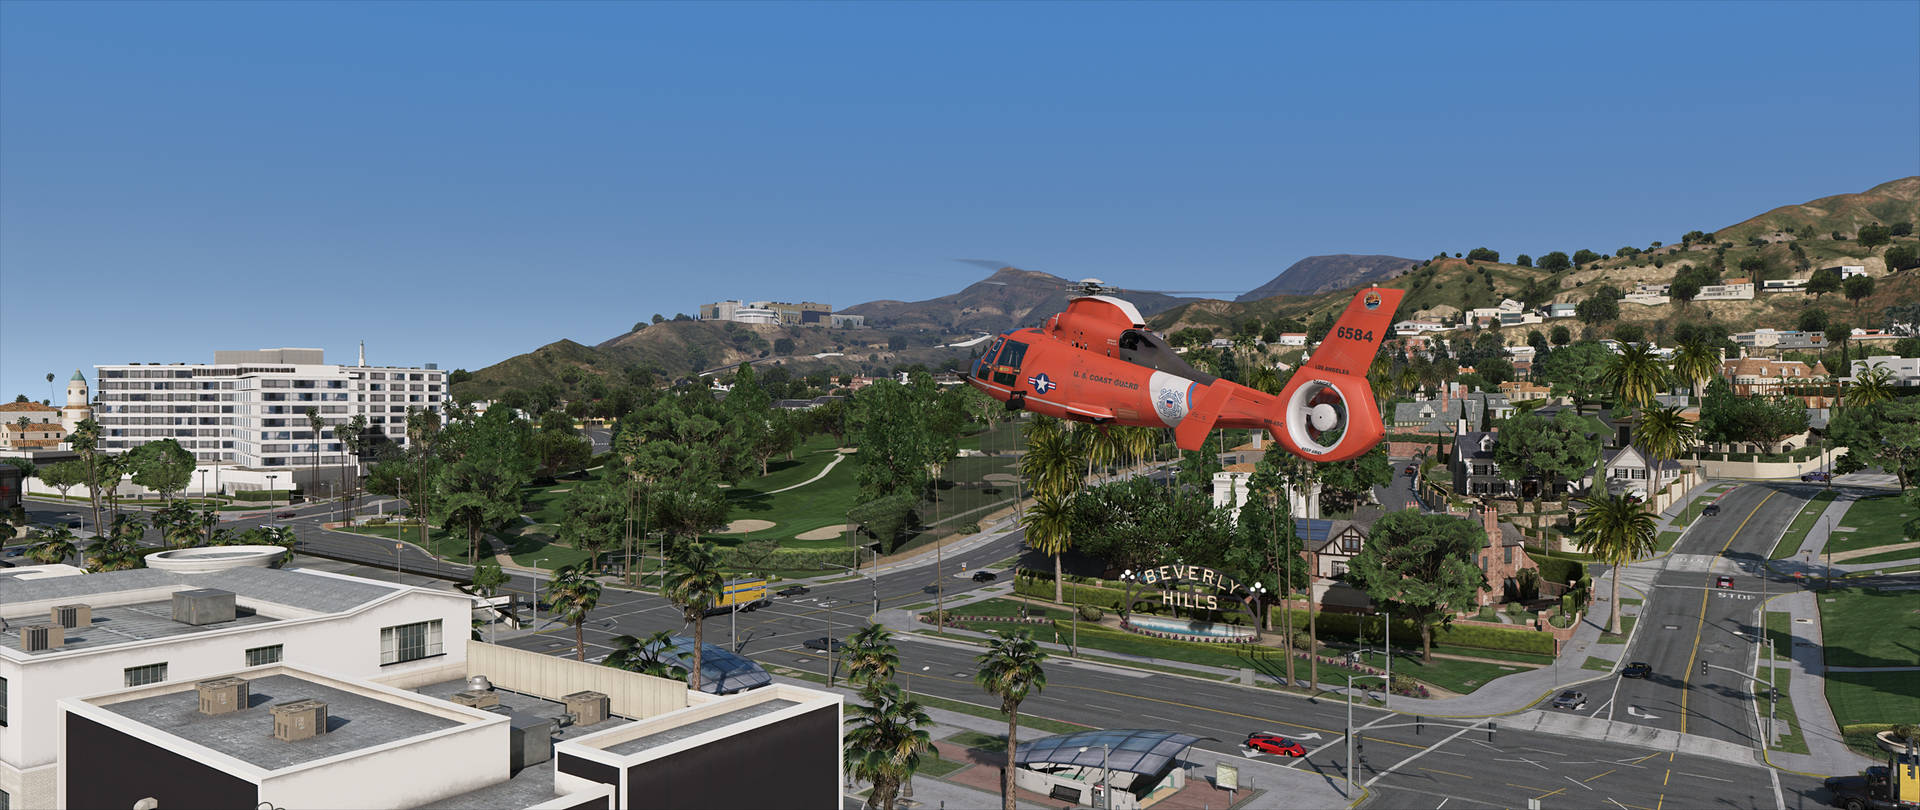 Grand Theft Auto V Red Chopper Flying Wallpaper